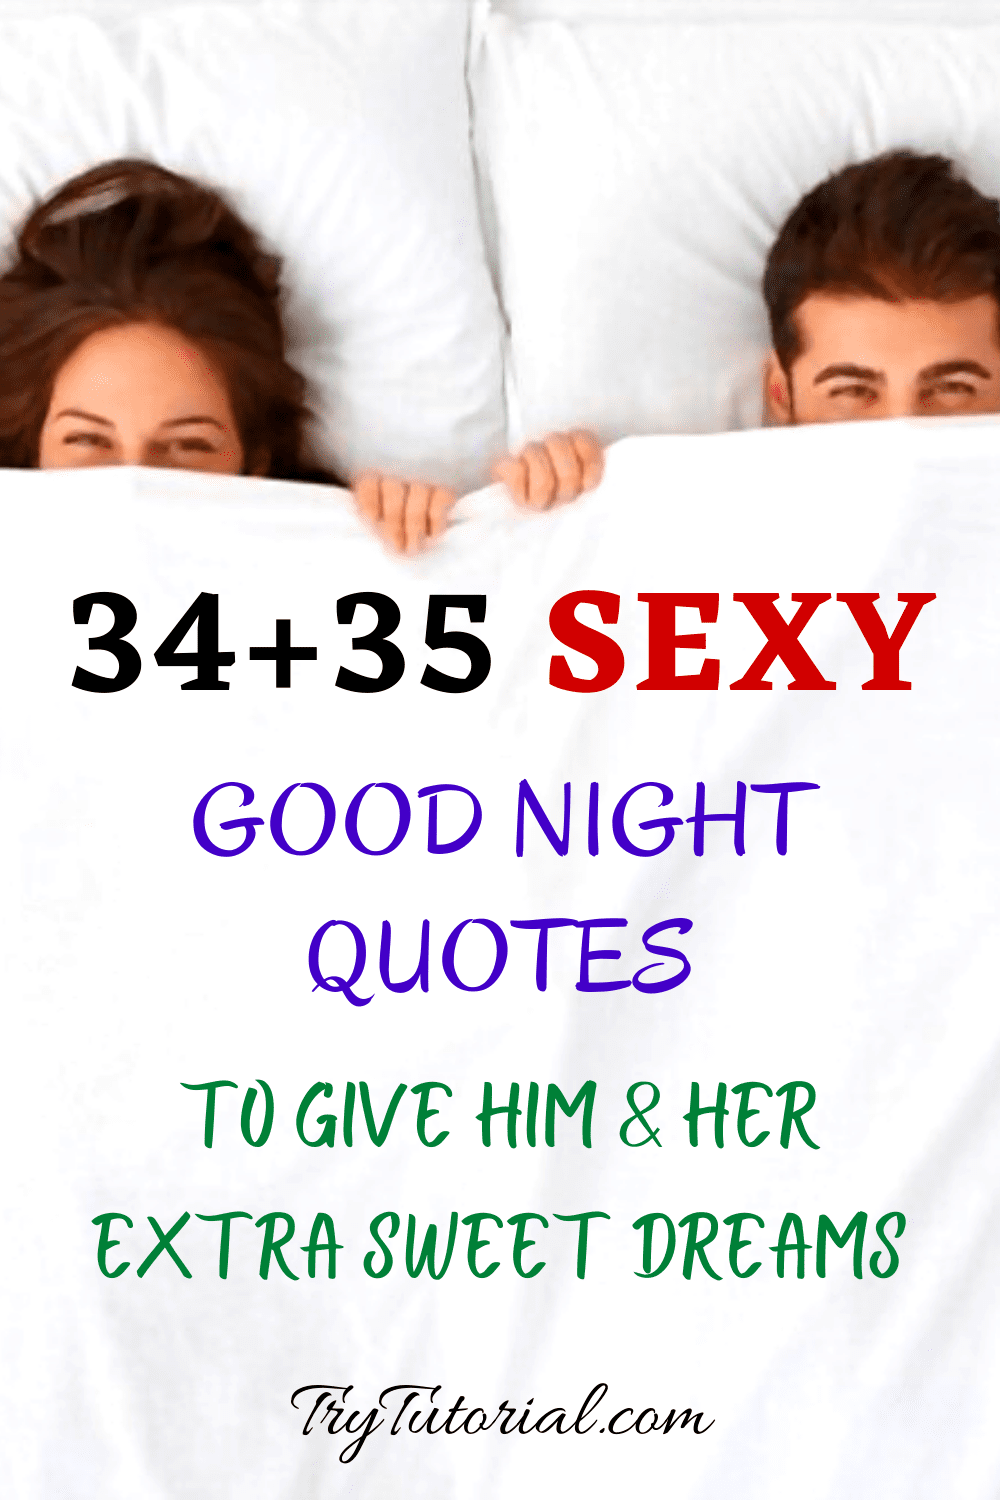 34+35 Sexy Good Night Quotes For Him & Her